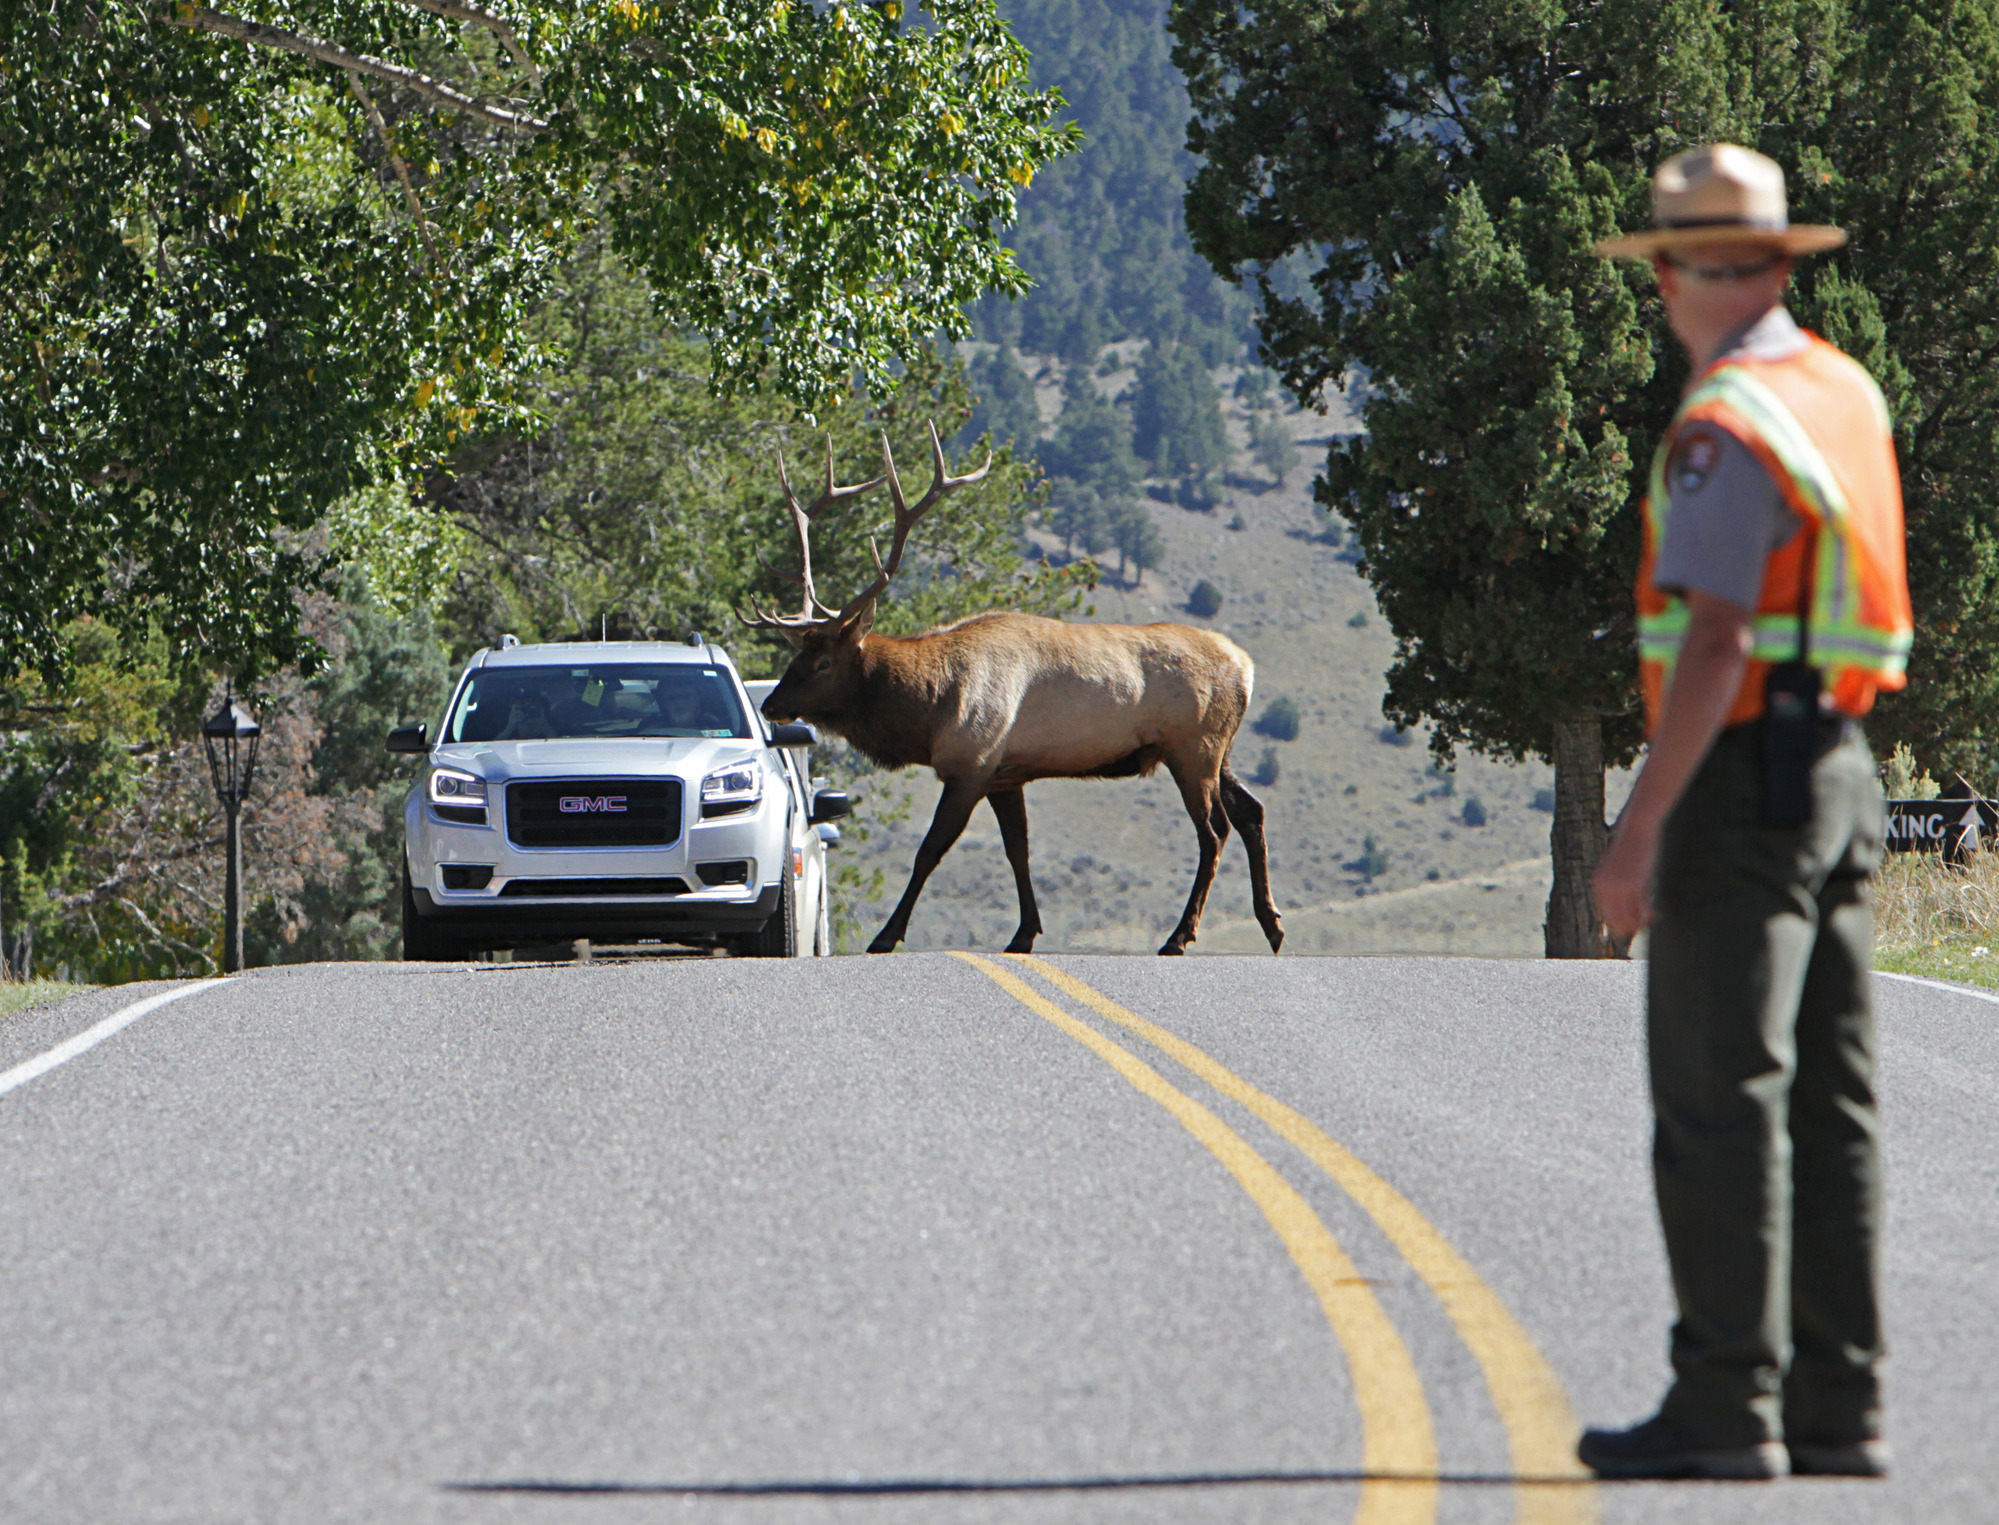 Ranger is in middle of road stopping traffic for a bull elk